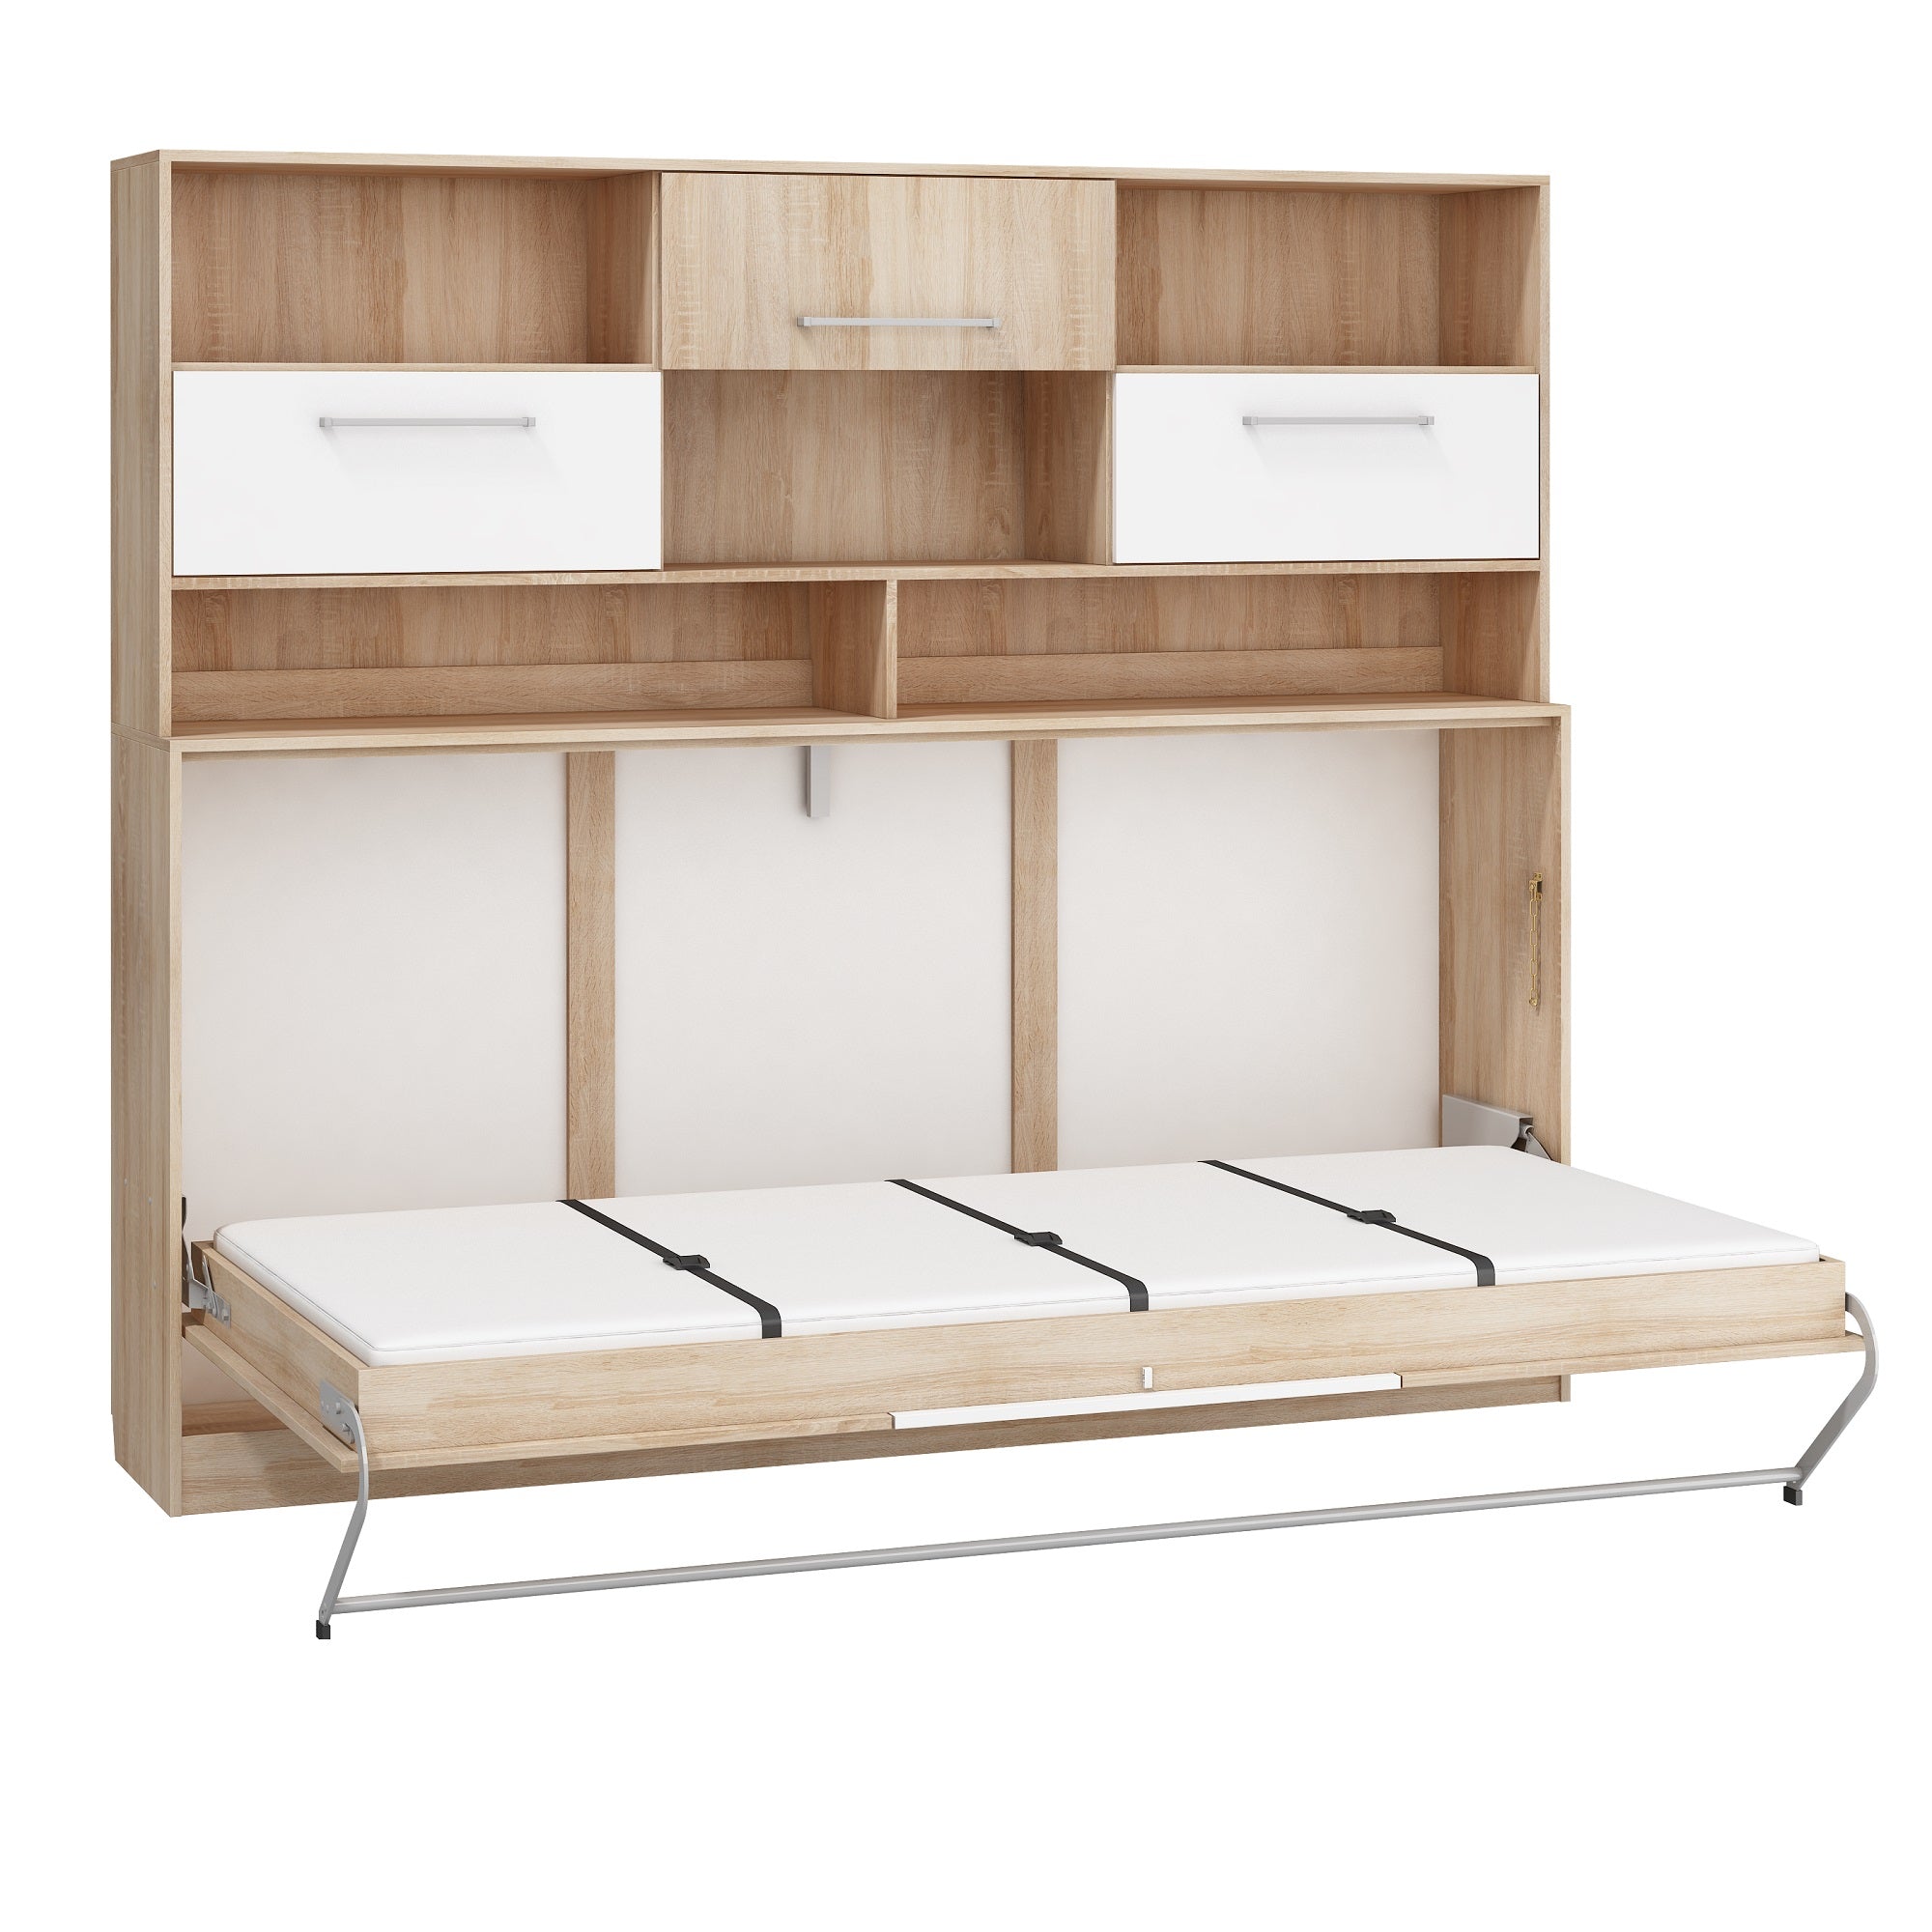 Roger European Single Kids Murphy Bed With Storage - Furniture.Agency